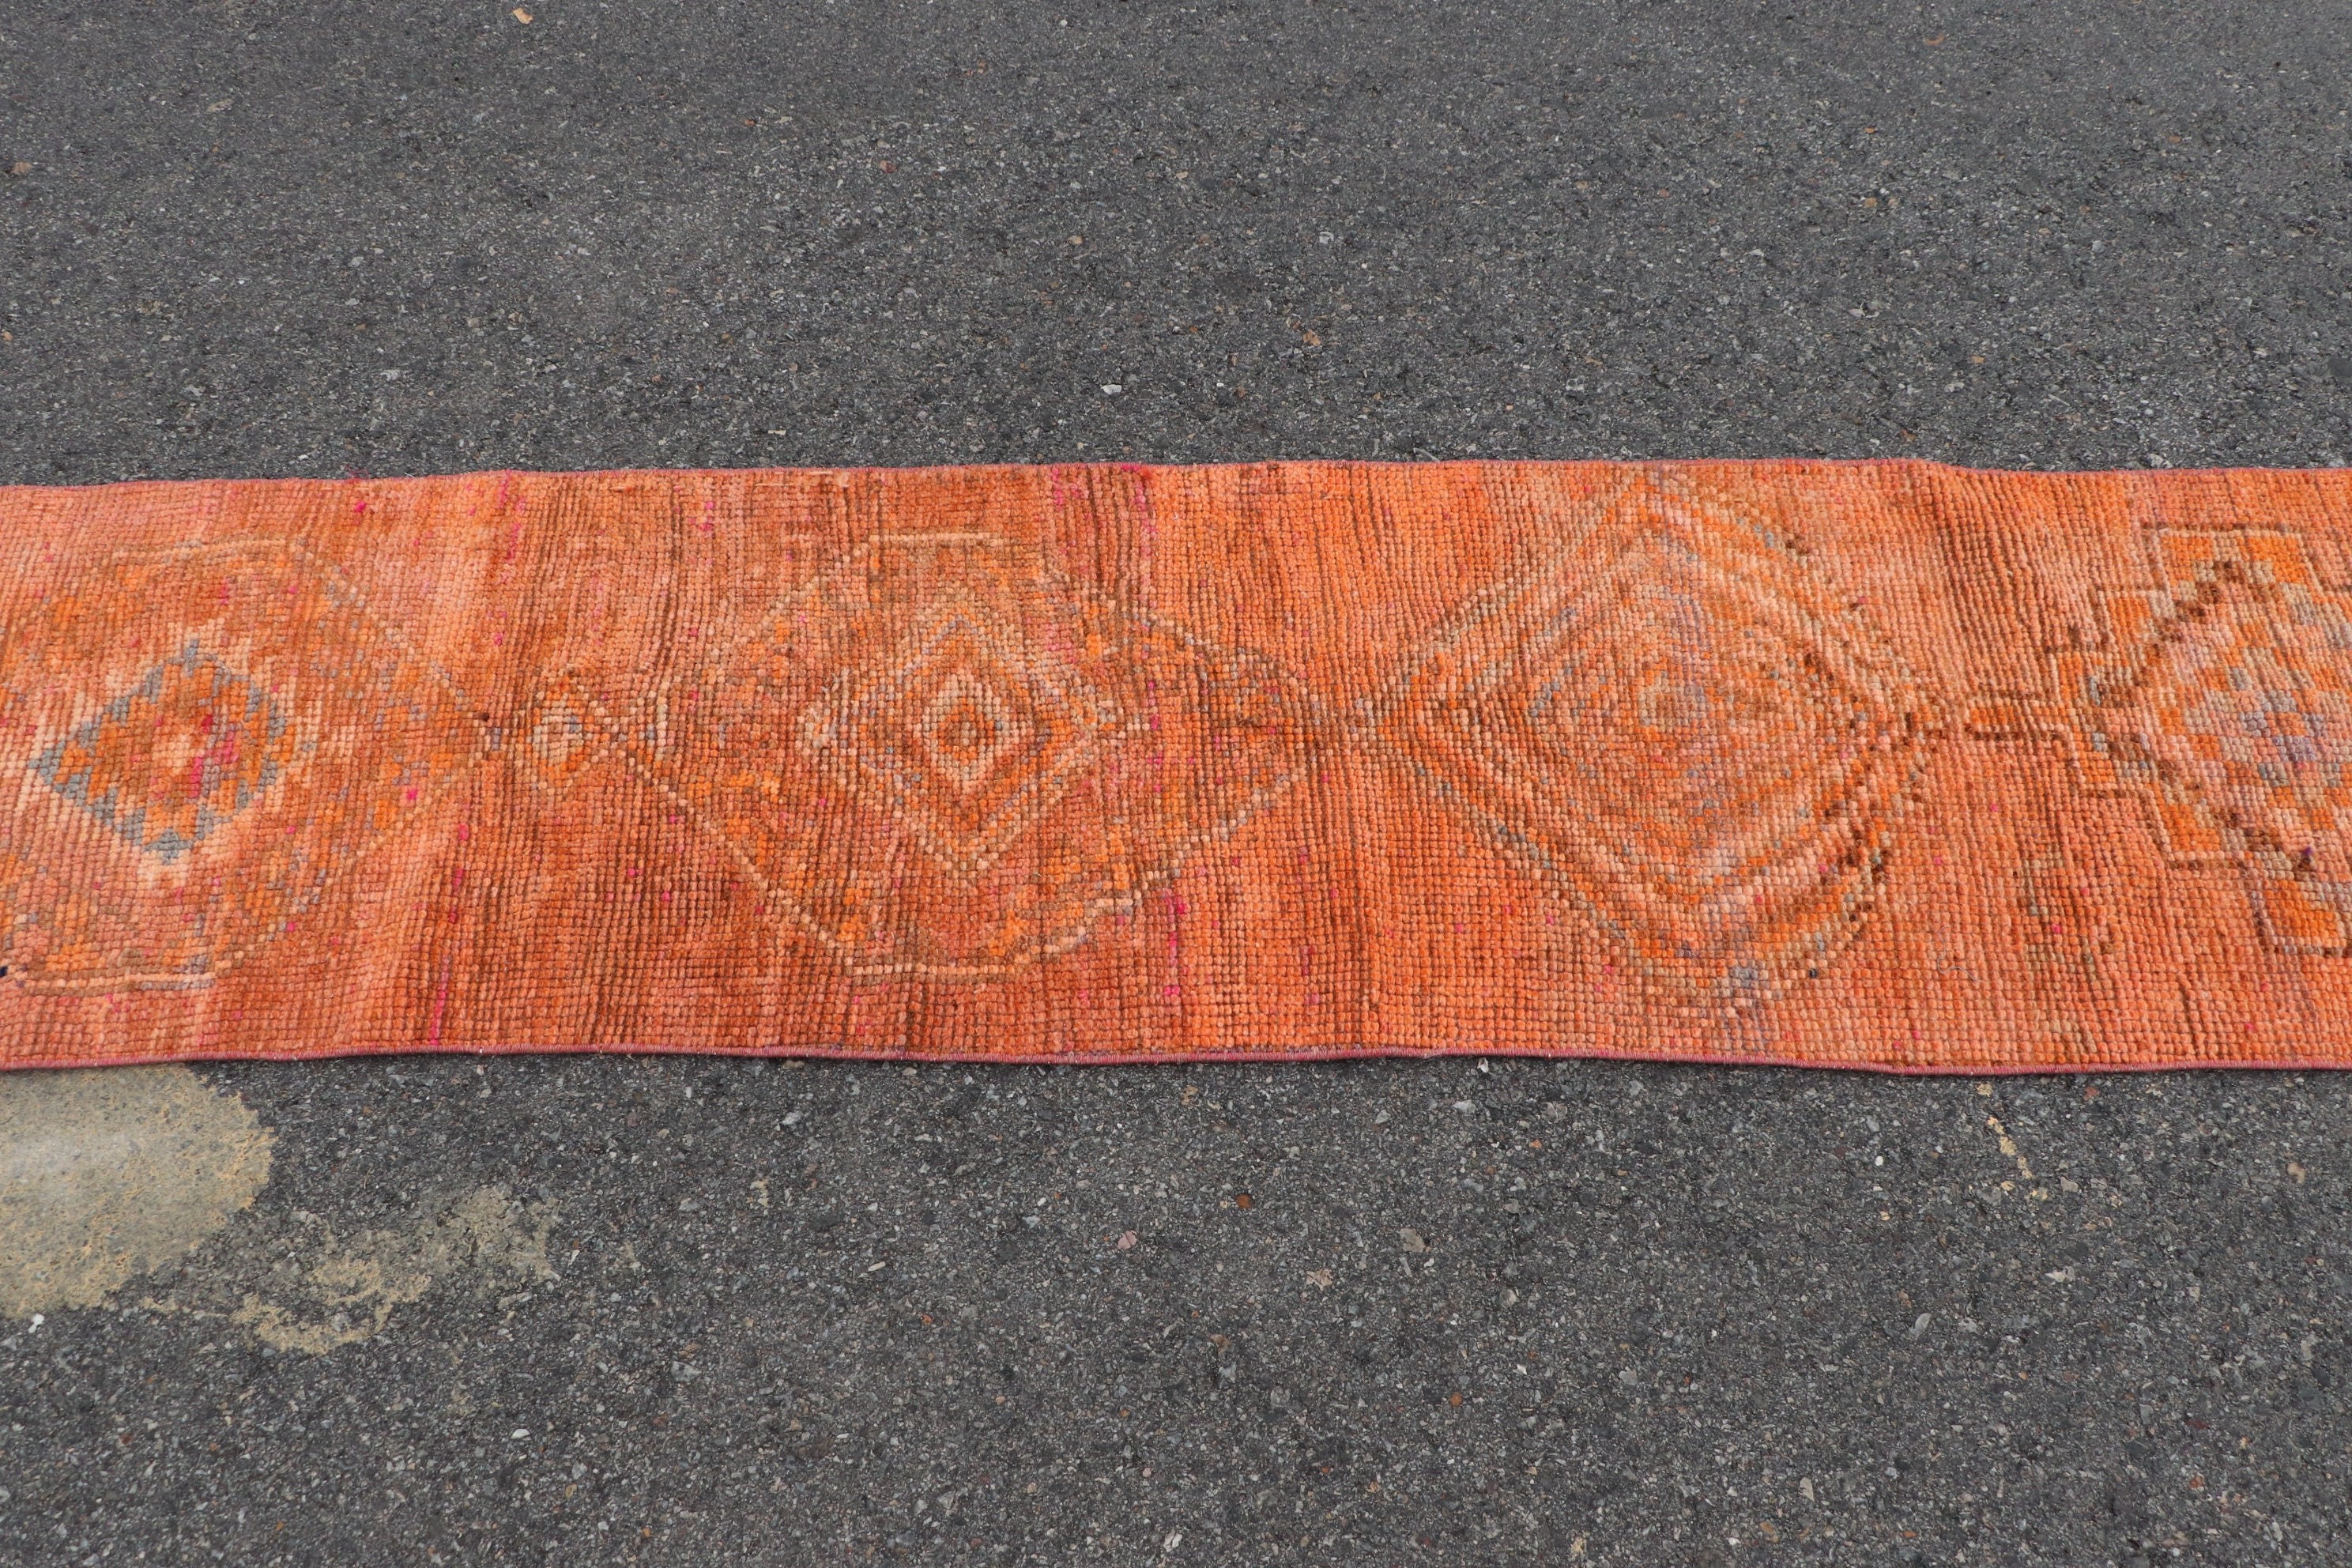 Orange Antique Rug, 1.9x8.8 ft Runner Rug, Vintage Rugs, Moroccan Rugs, Kitchen Rugs, Muted Rugs, Antique Rug, Turkish Rug, Rugs for Stair